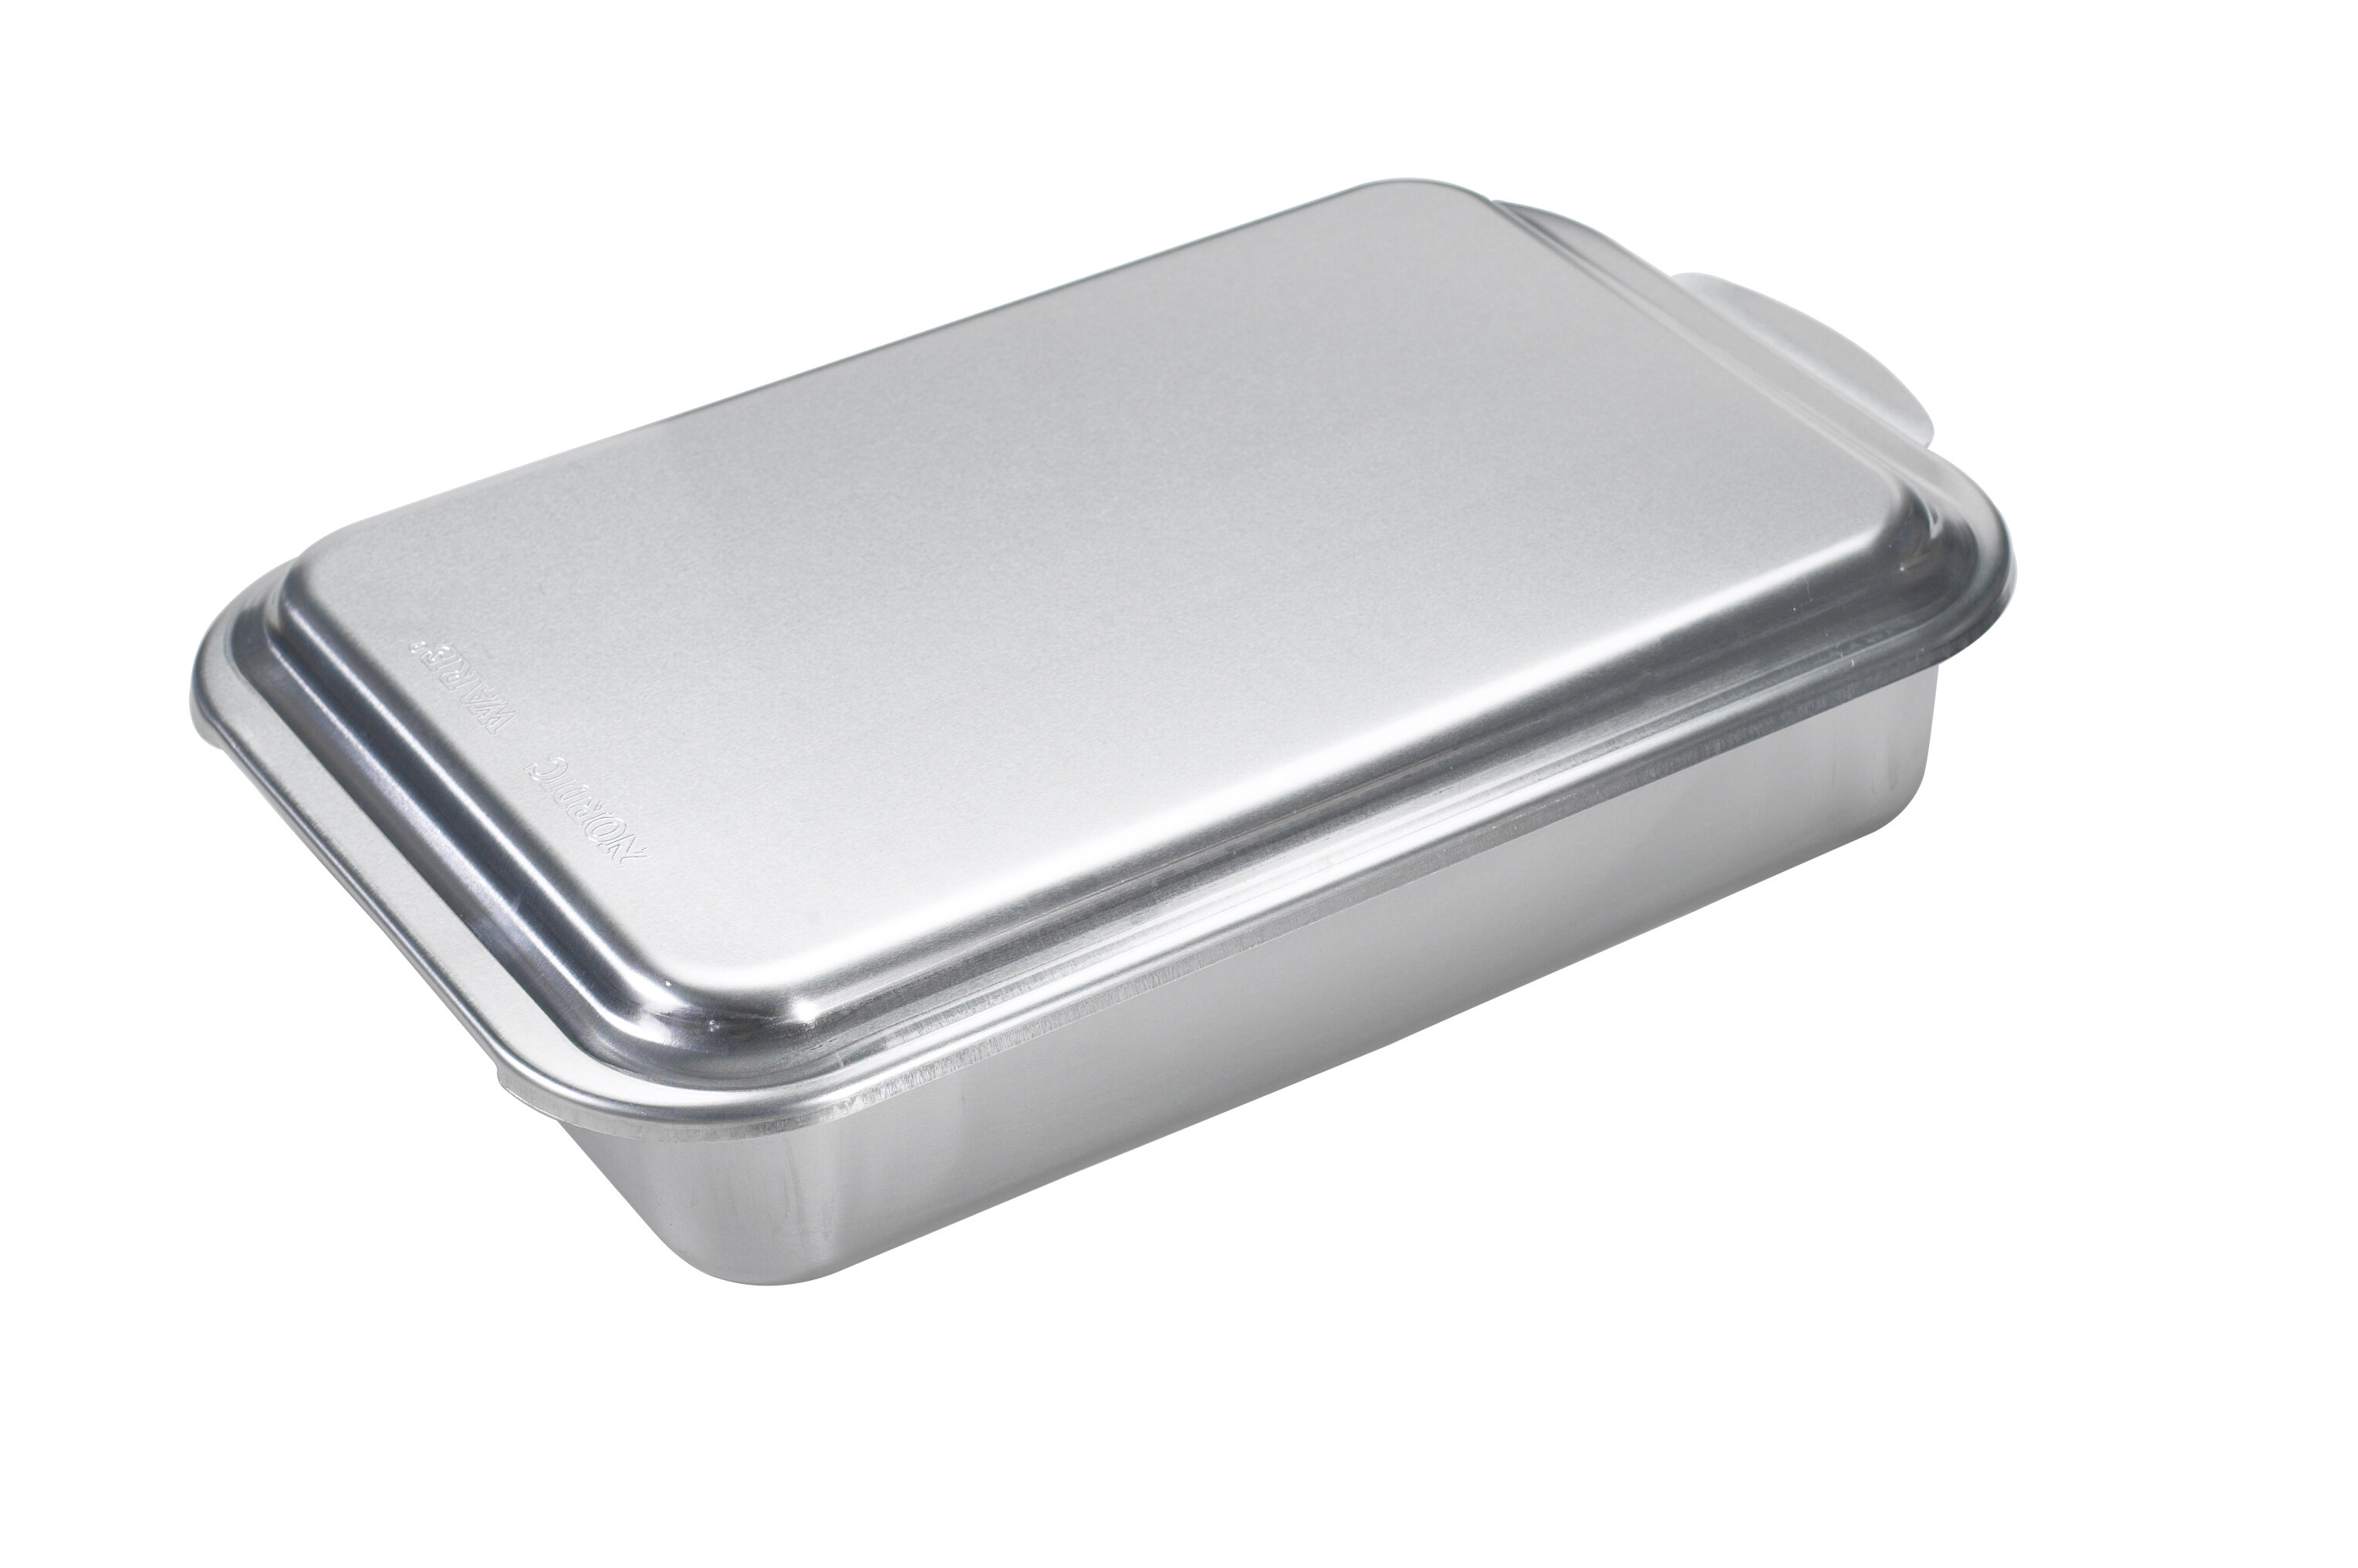 Nordic Ware 13 X 13 Square Meal Pan, One Size, Steel